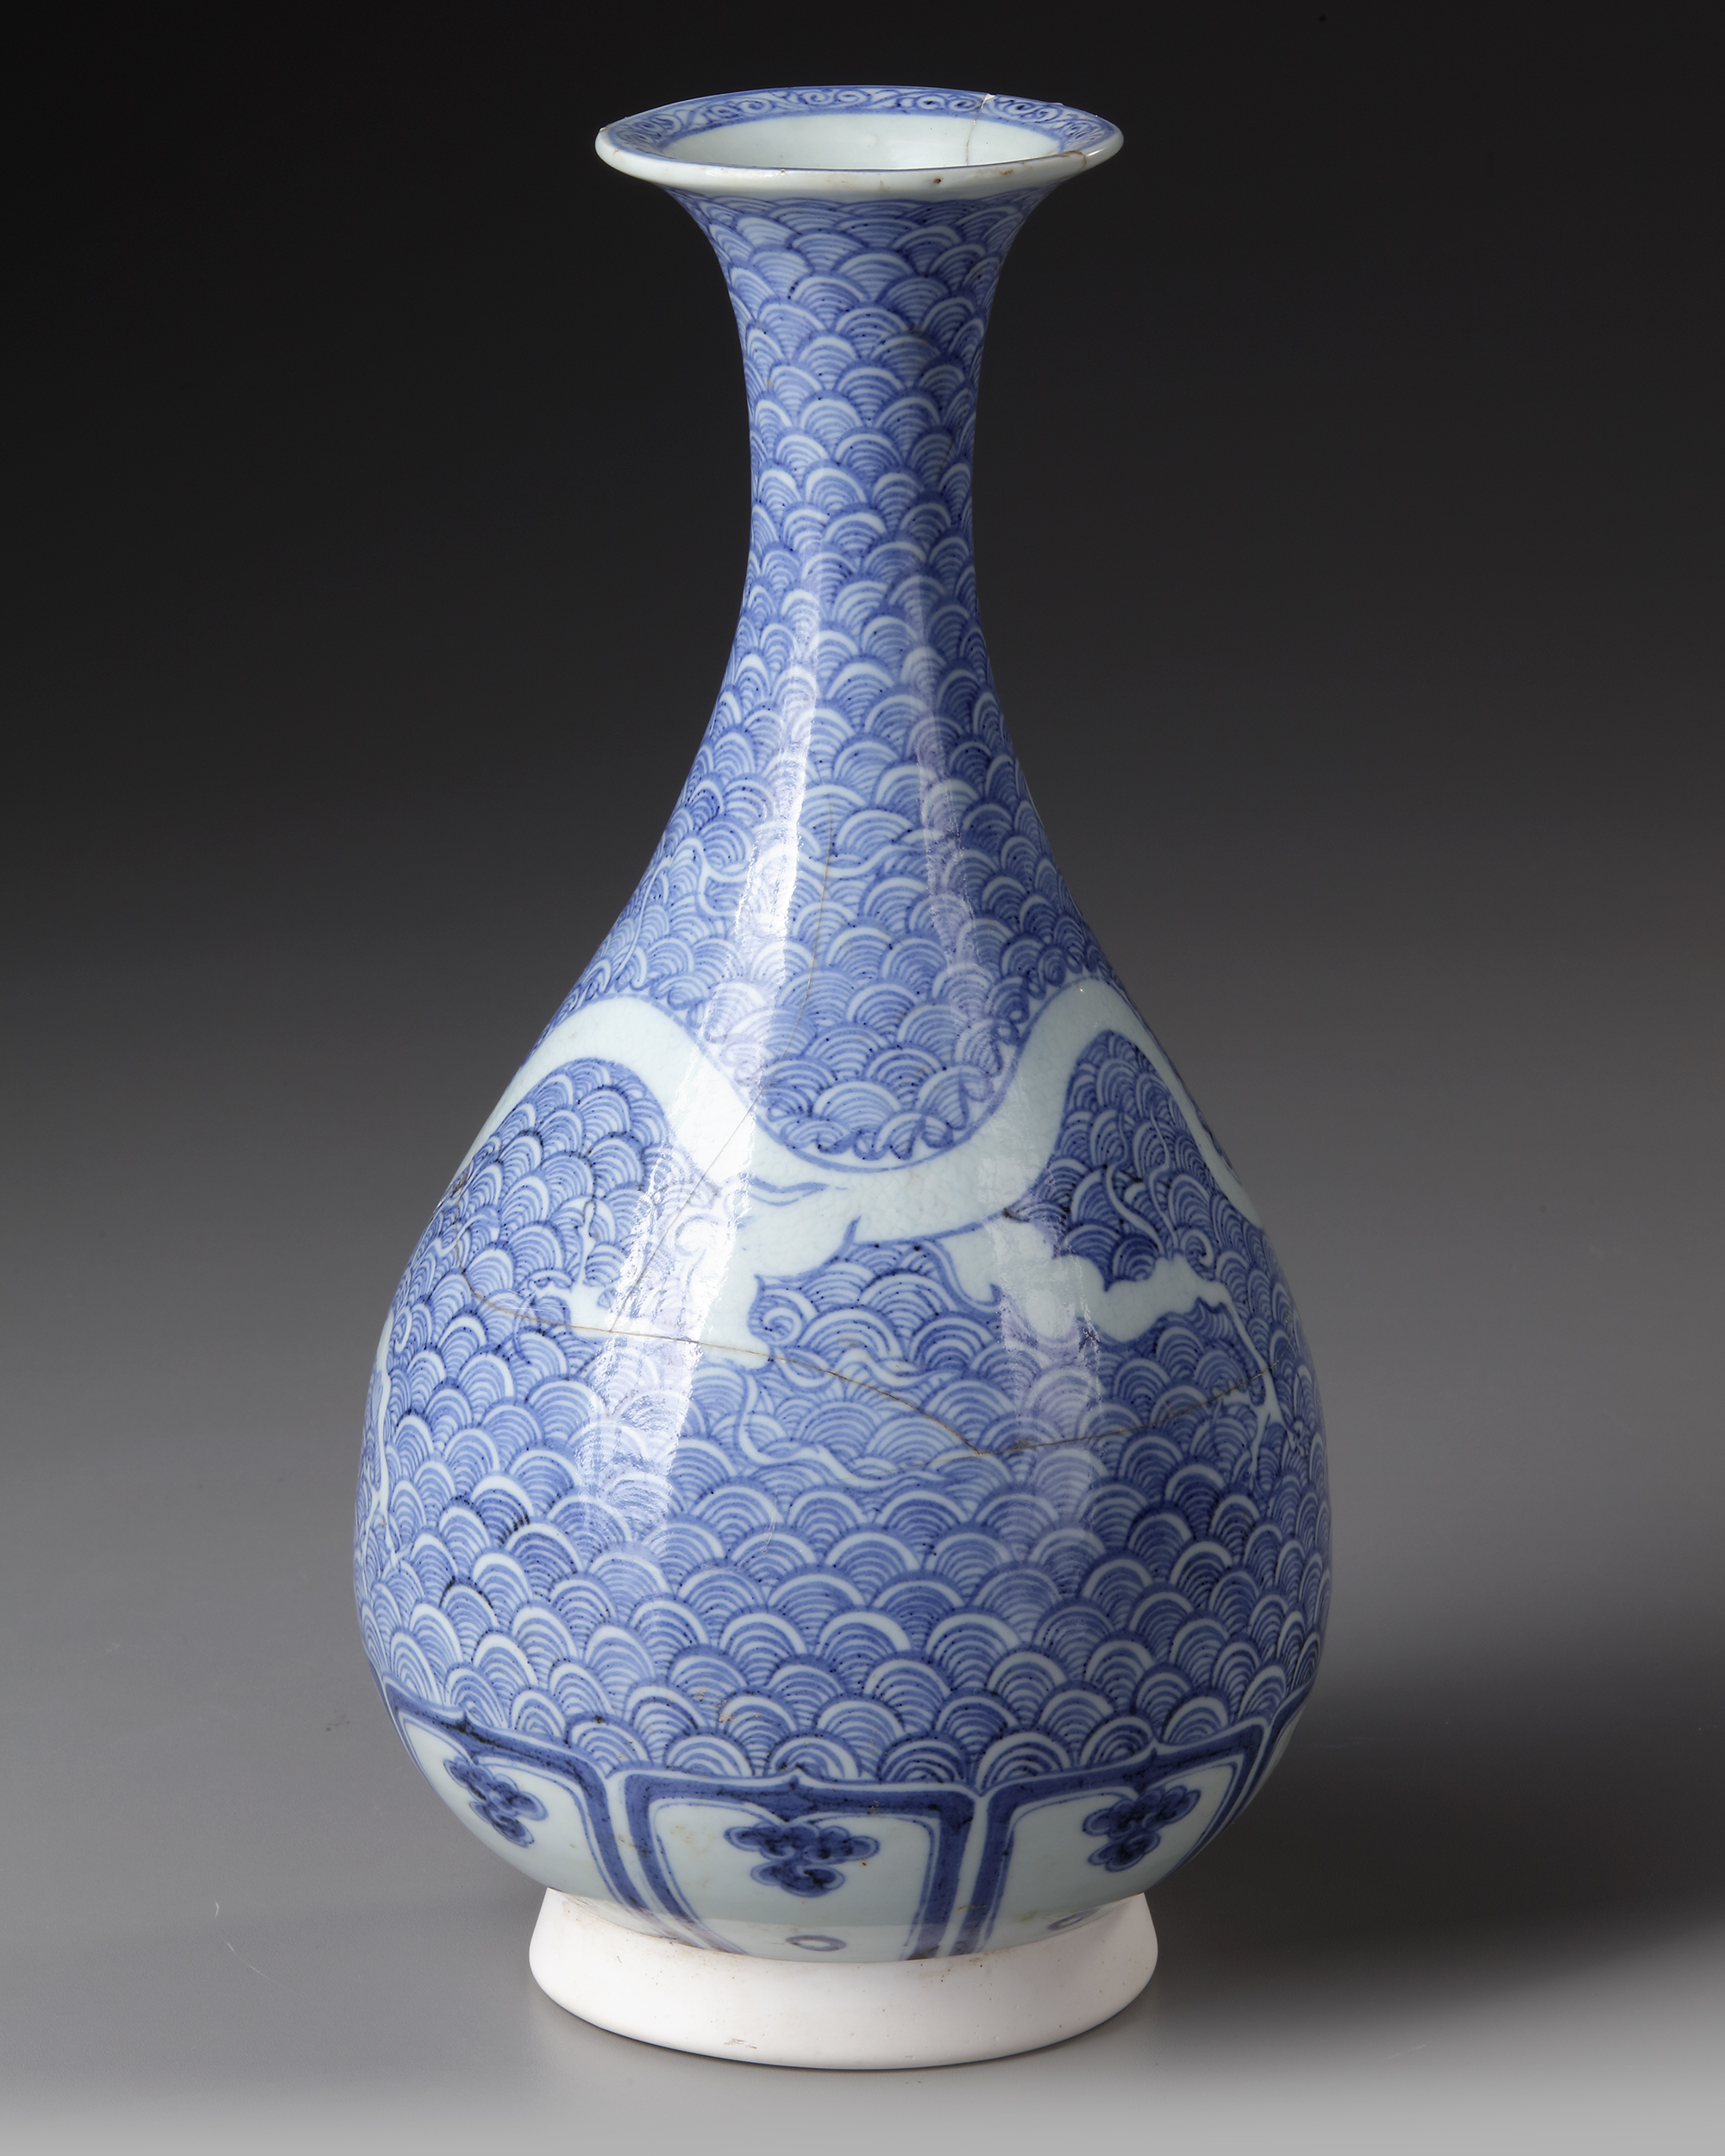 A CHINESE BLUE AND WHITE DRAGON VASE, QING DYNASTY (1644–1911) - Image 2 of 4